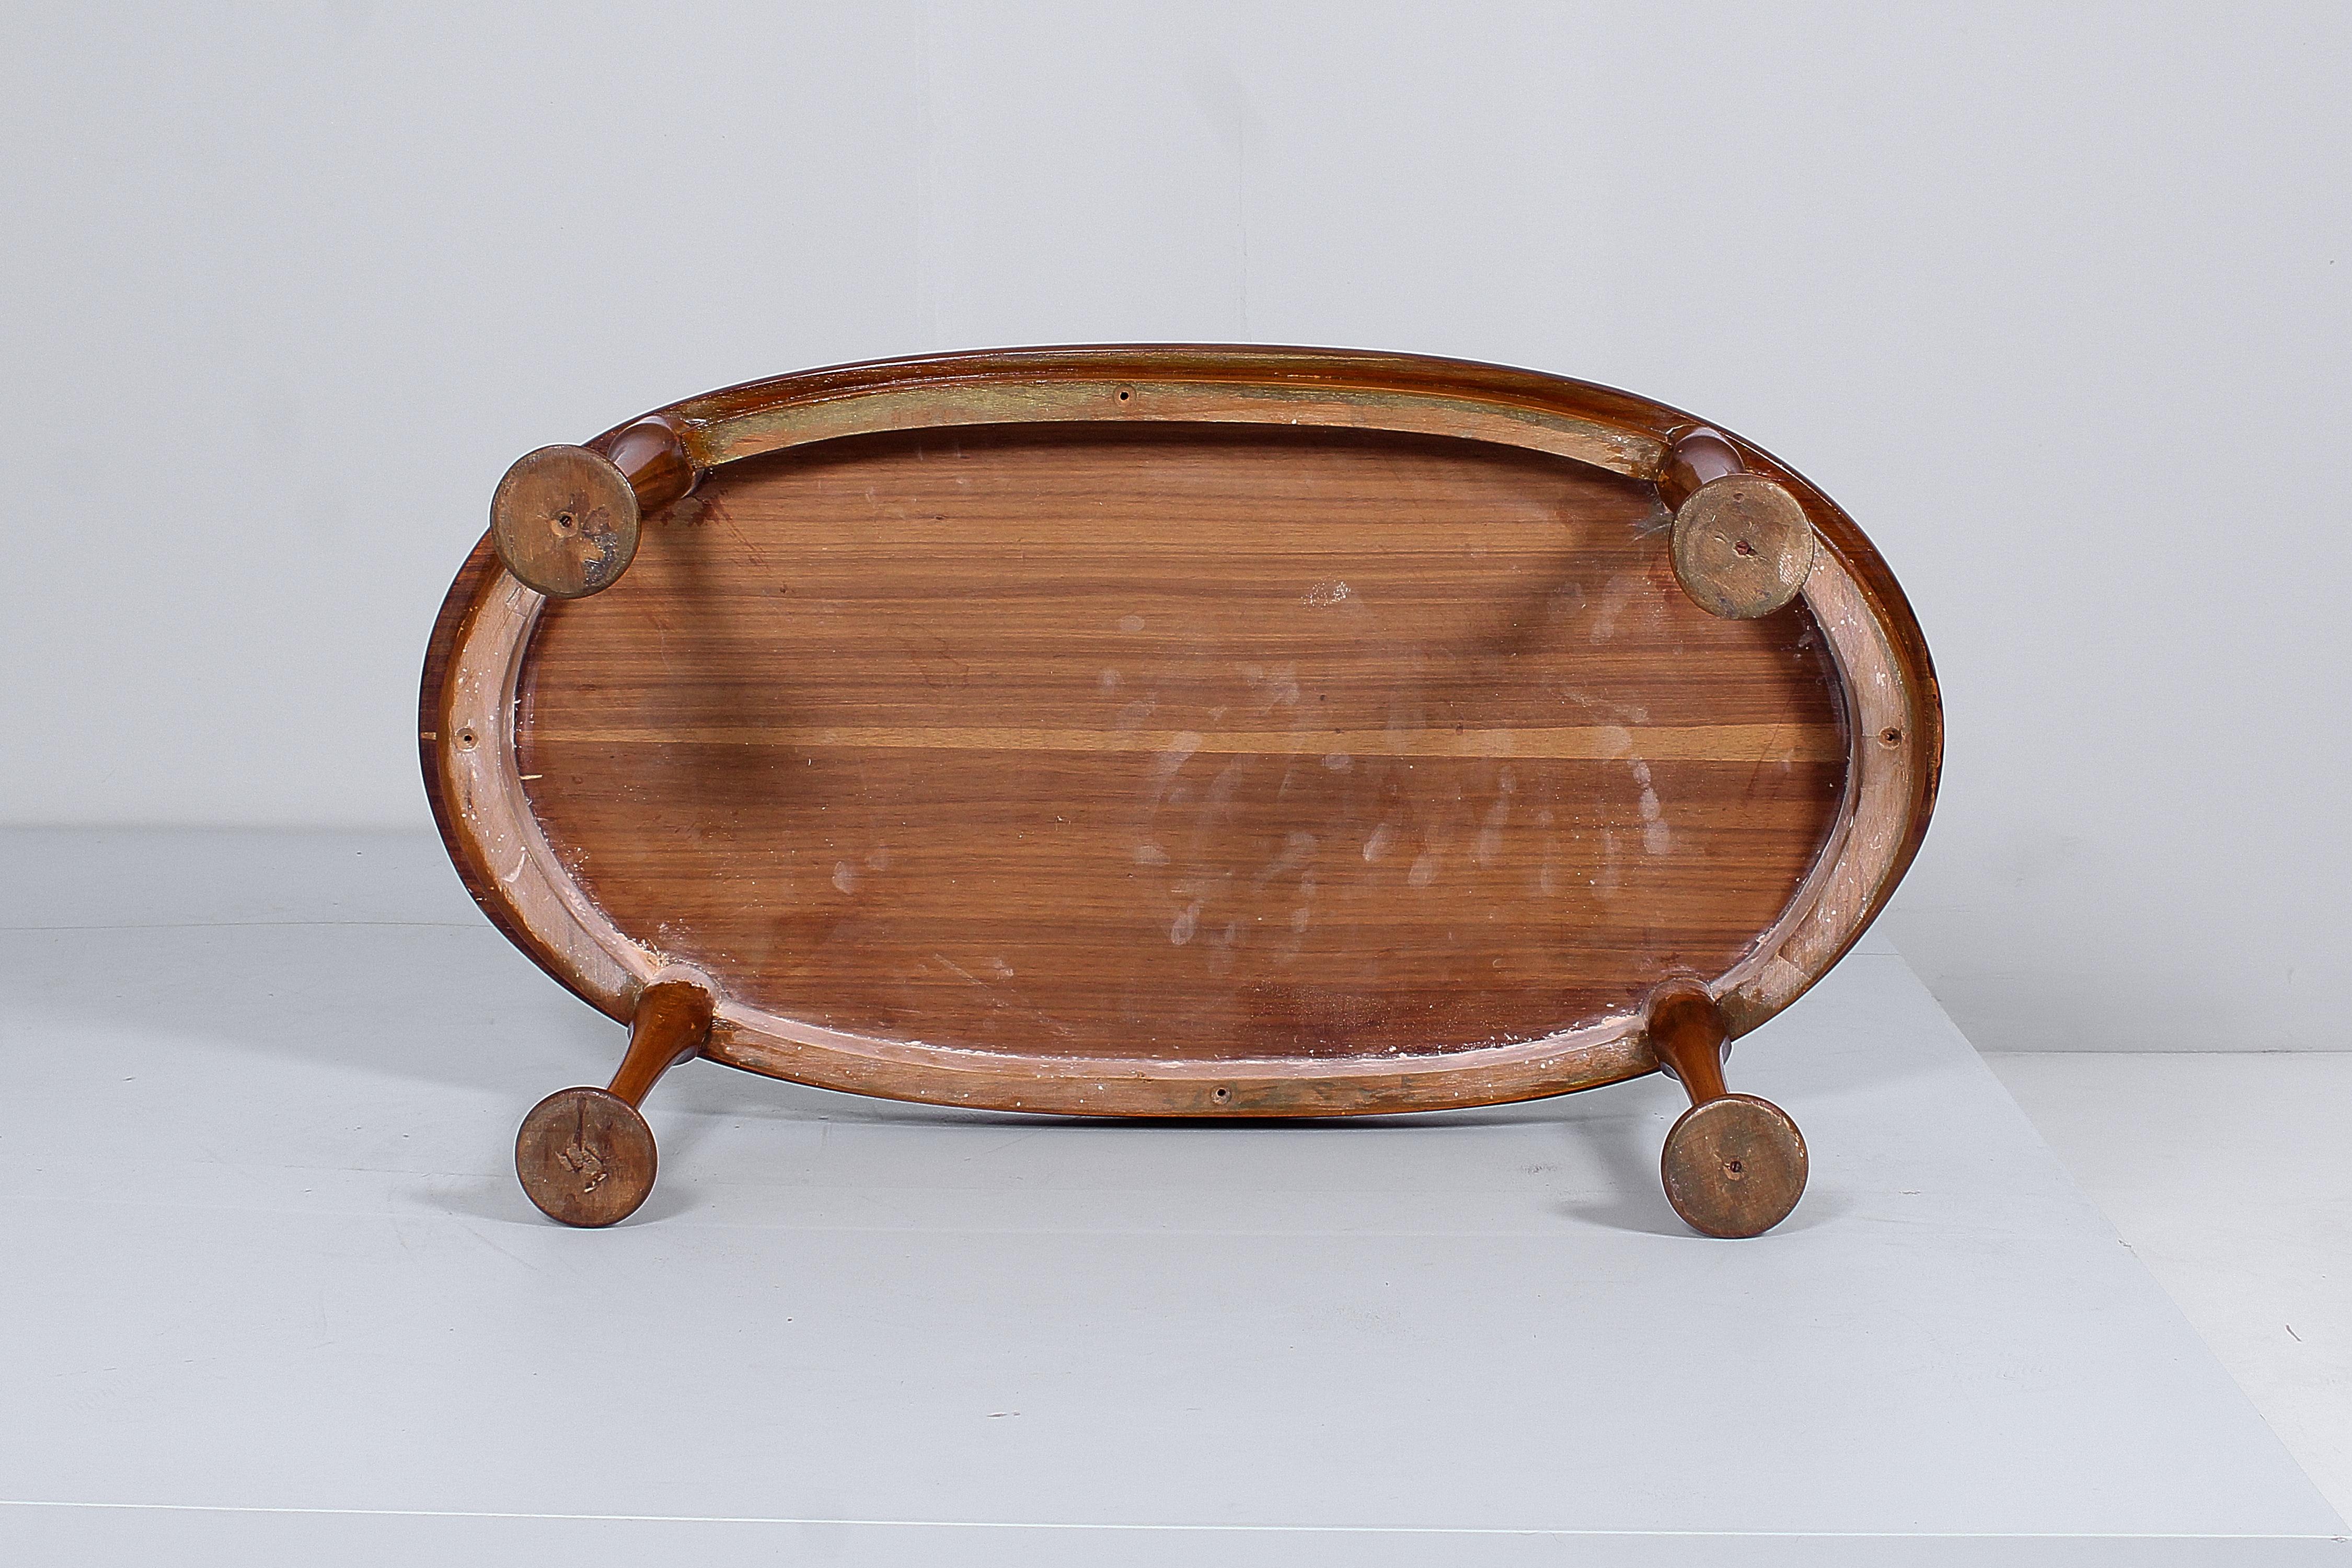 Midcentury A. Mangiarotti Style Wood Coffee Table, 60s, Italy For Sale 4